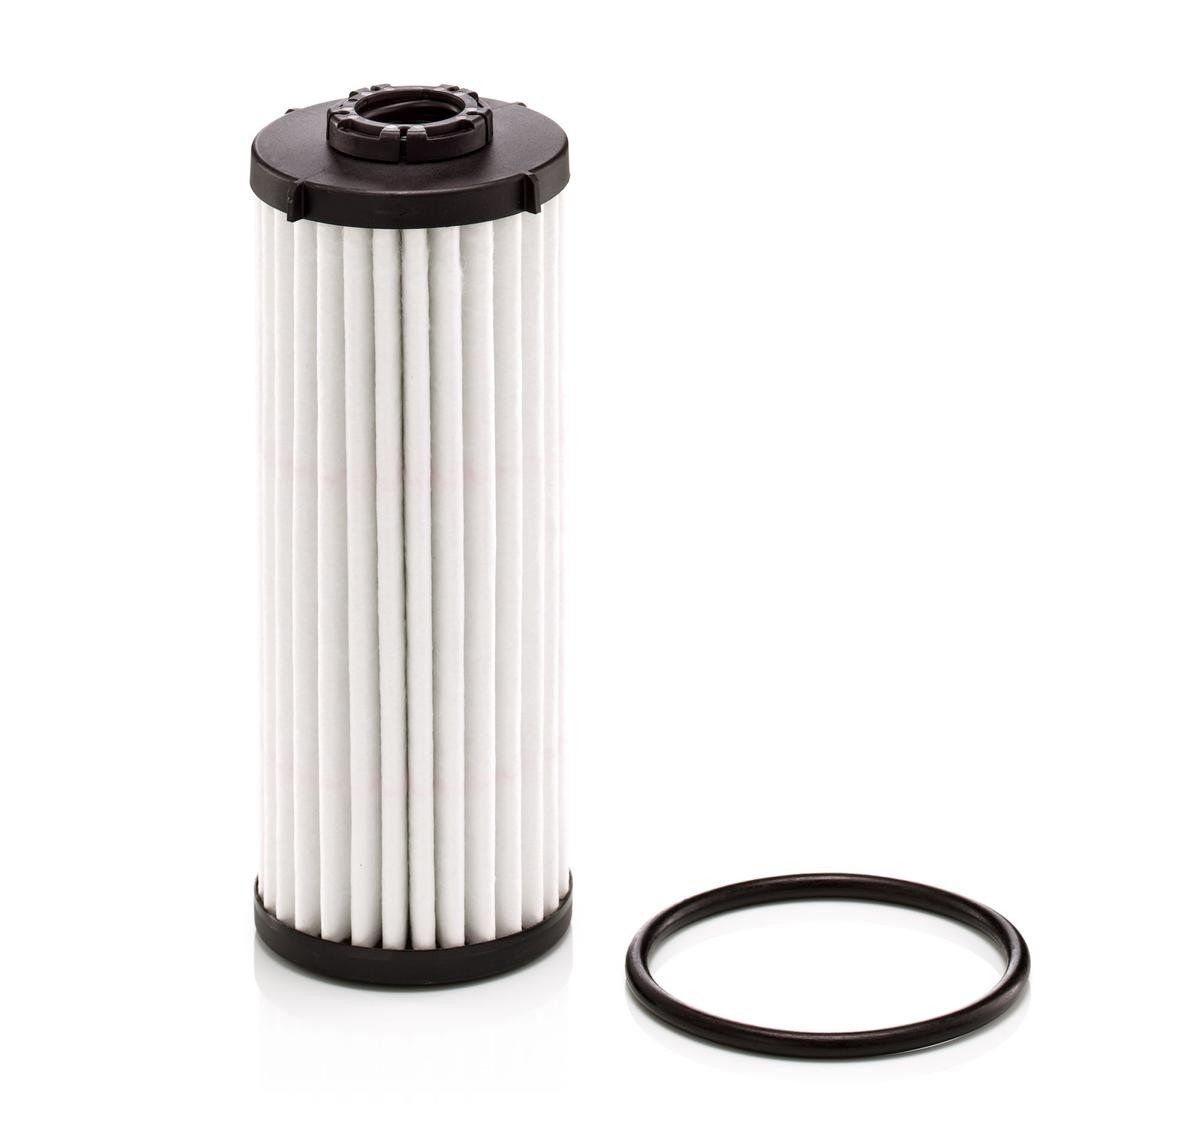 H 6031 z MANN-FILTER Automatic gearbox filter CHEVROLET with seal